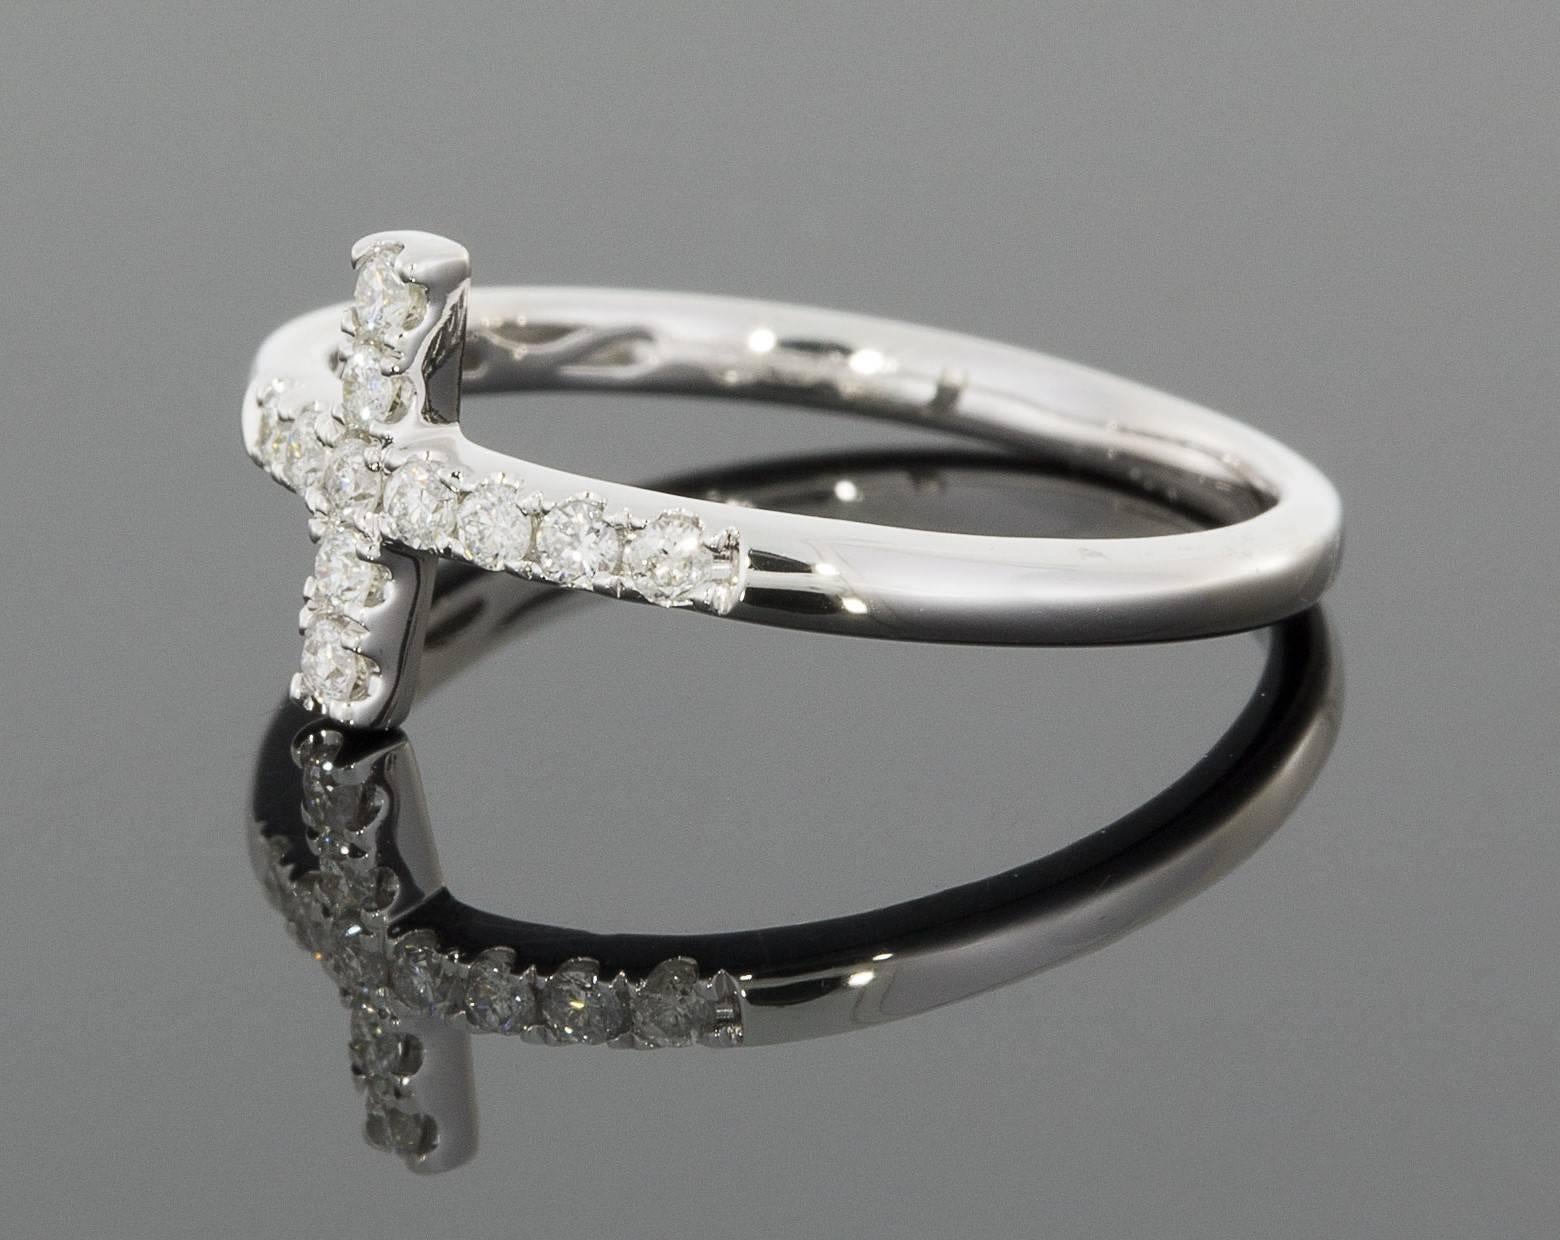 Show your faith with this beautiful diamond cross ring! The ring can be worn normally or as a midi ring, one of the hottest trends in jewelry meant to be worn in the middle of the finger between the knuckles. This lovely ring features a traditional